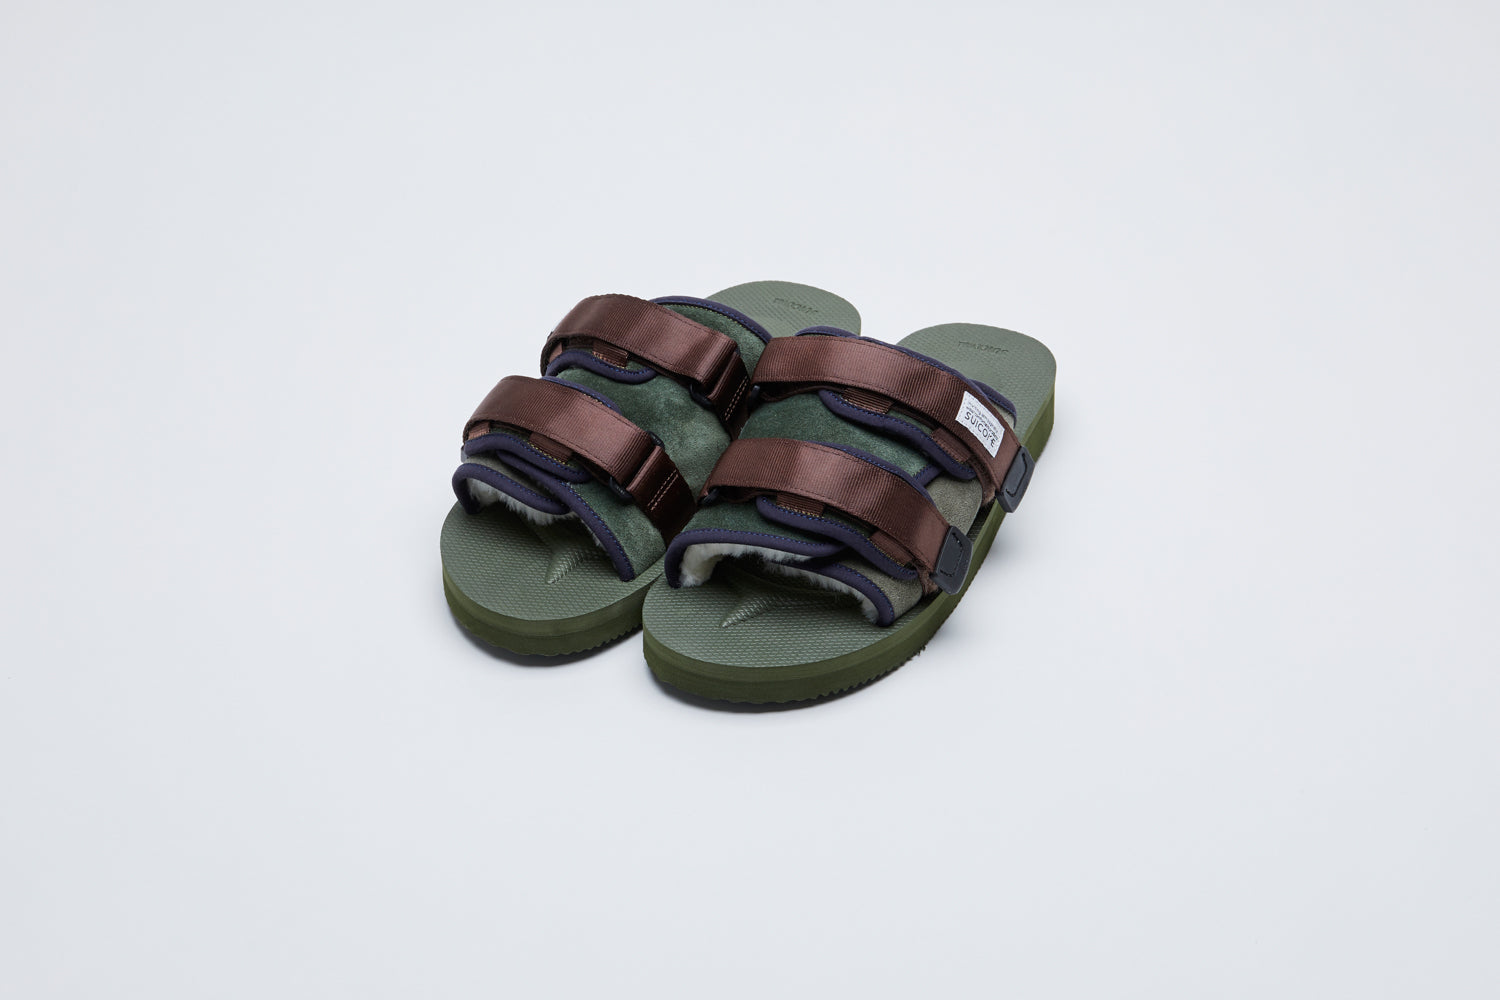 SUICOKE MOTO-Mab suede slides with green midsole and sole, green suede upper and shearling inside with navy piping and brown nylon straps with a logo patch. From Fall/Winter 2021 collection on SUICOKE Official US &amp; Canada Webstore.